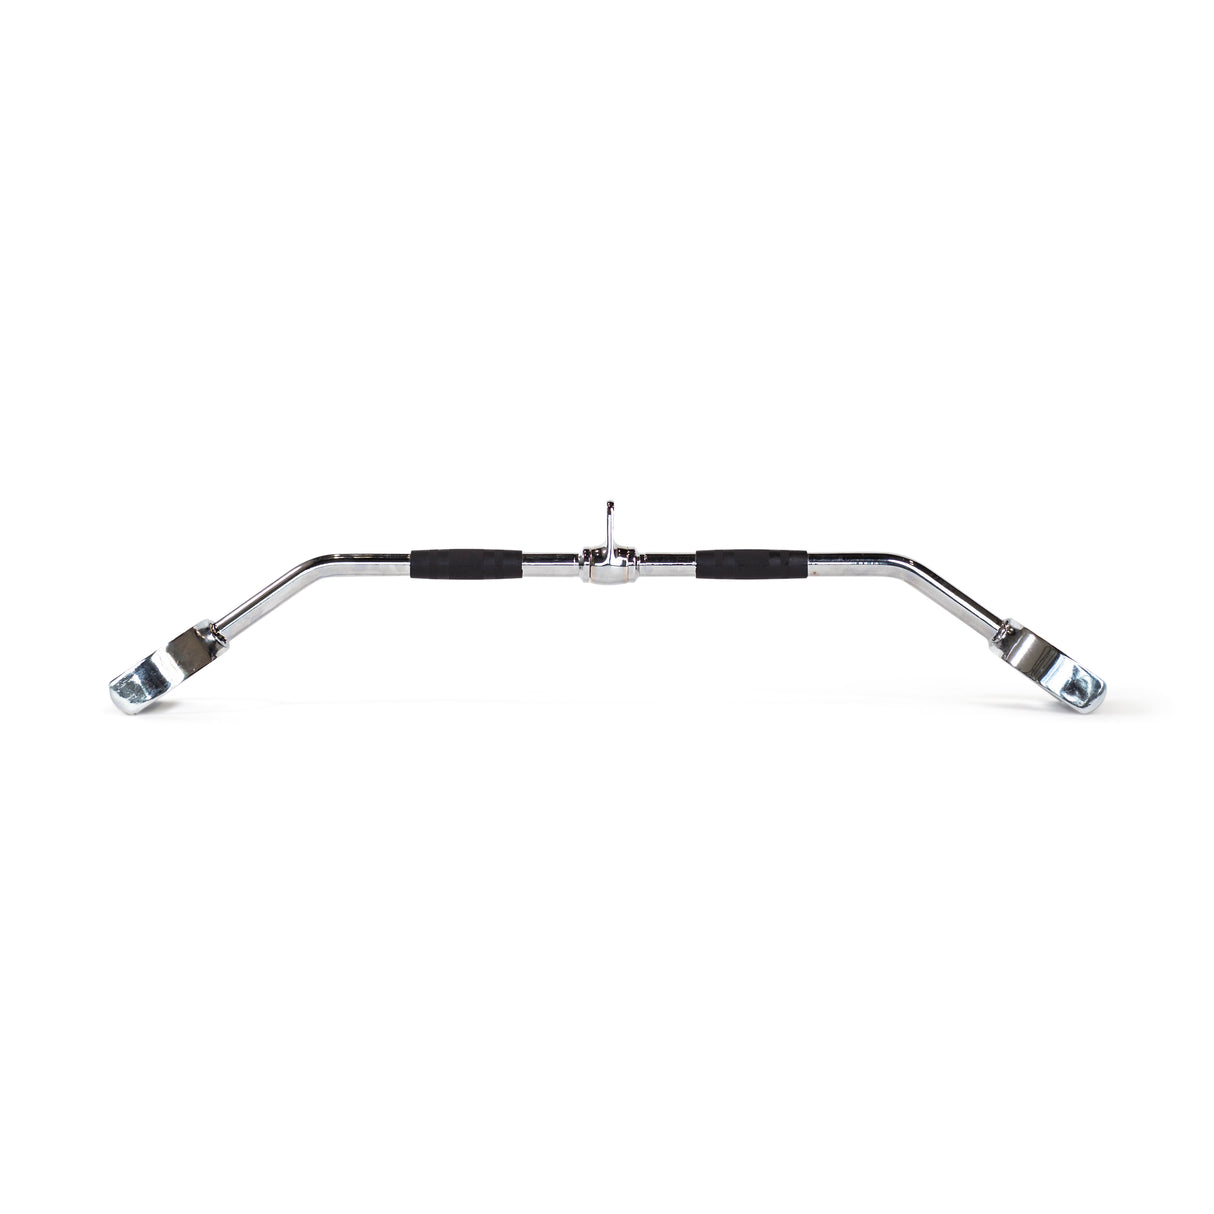 Pro-Style Lat Bar Cable Attachment 38 Inches